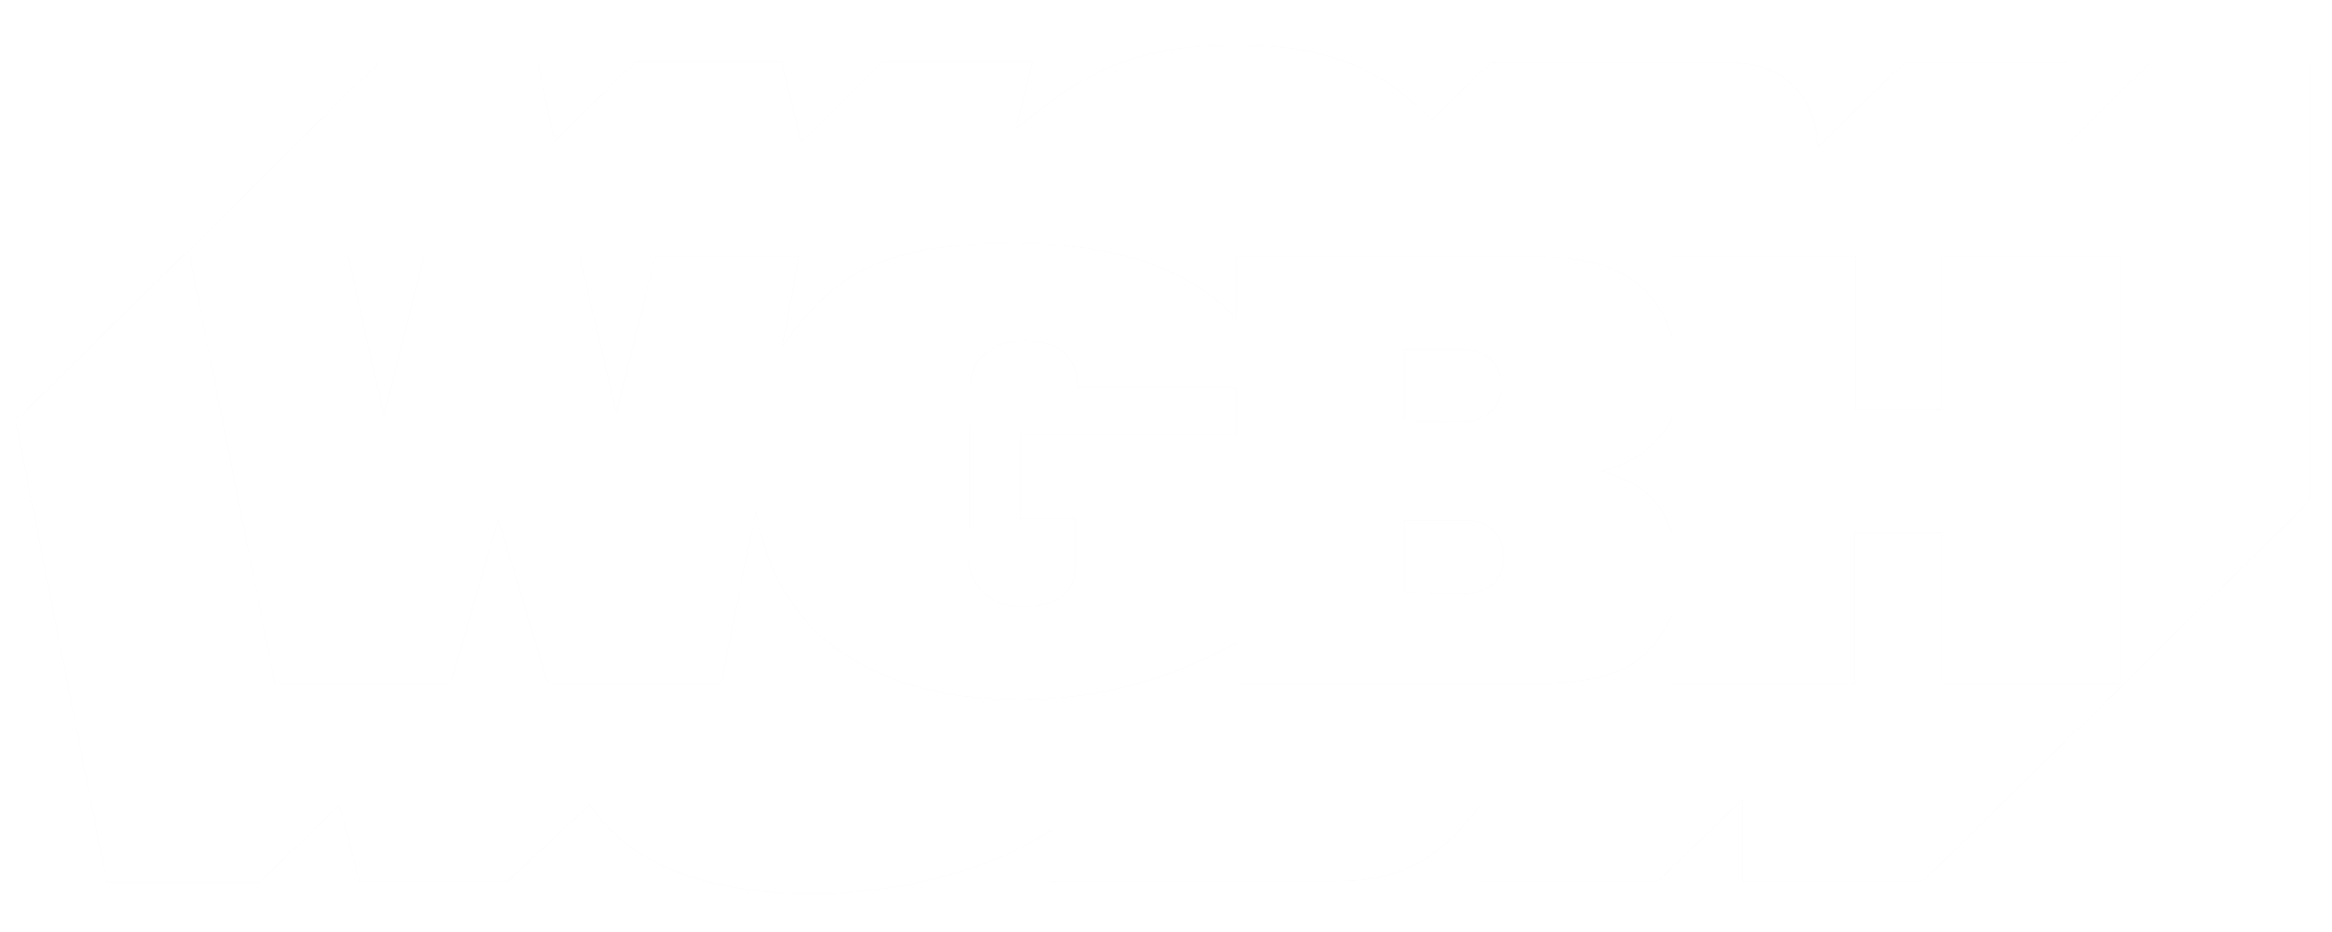 WGBX Logo - WGBH Features